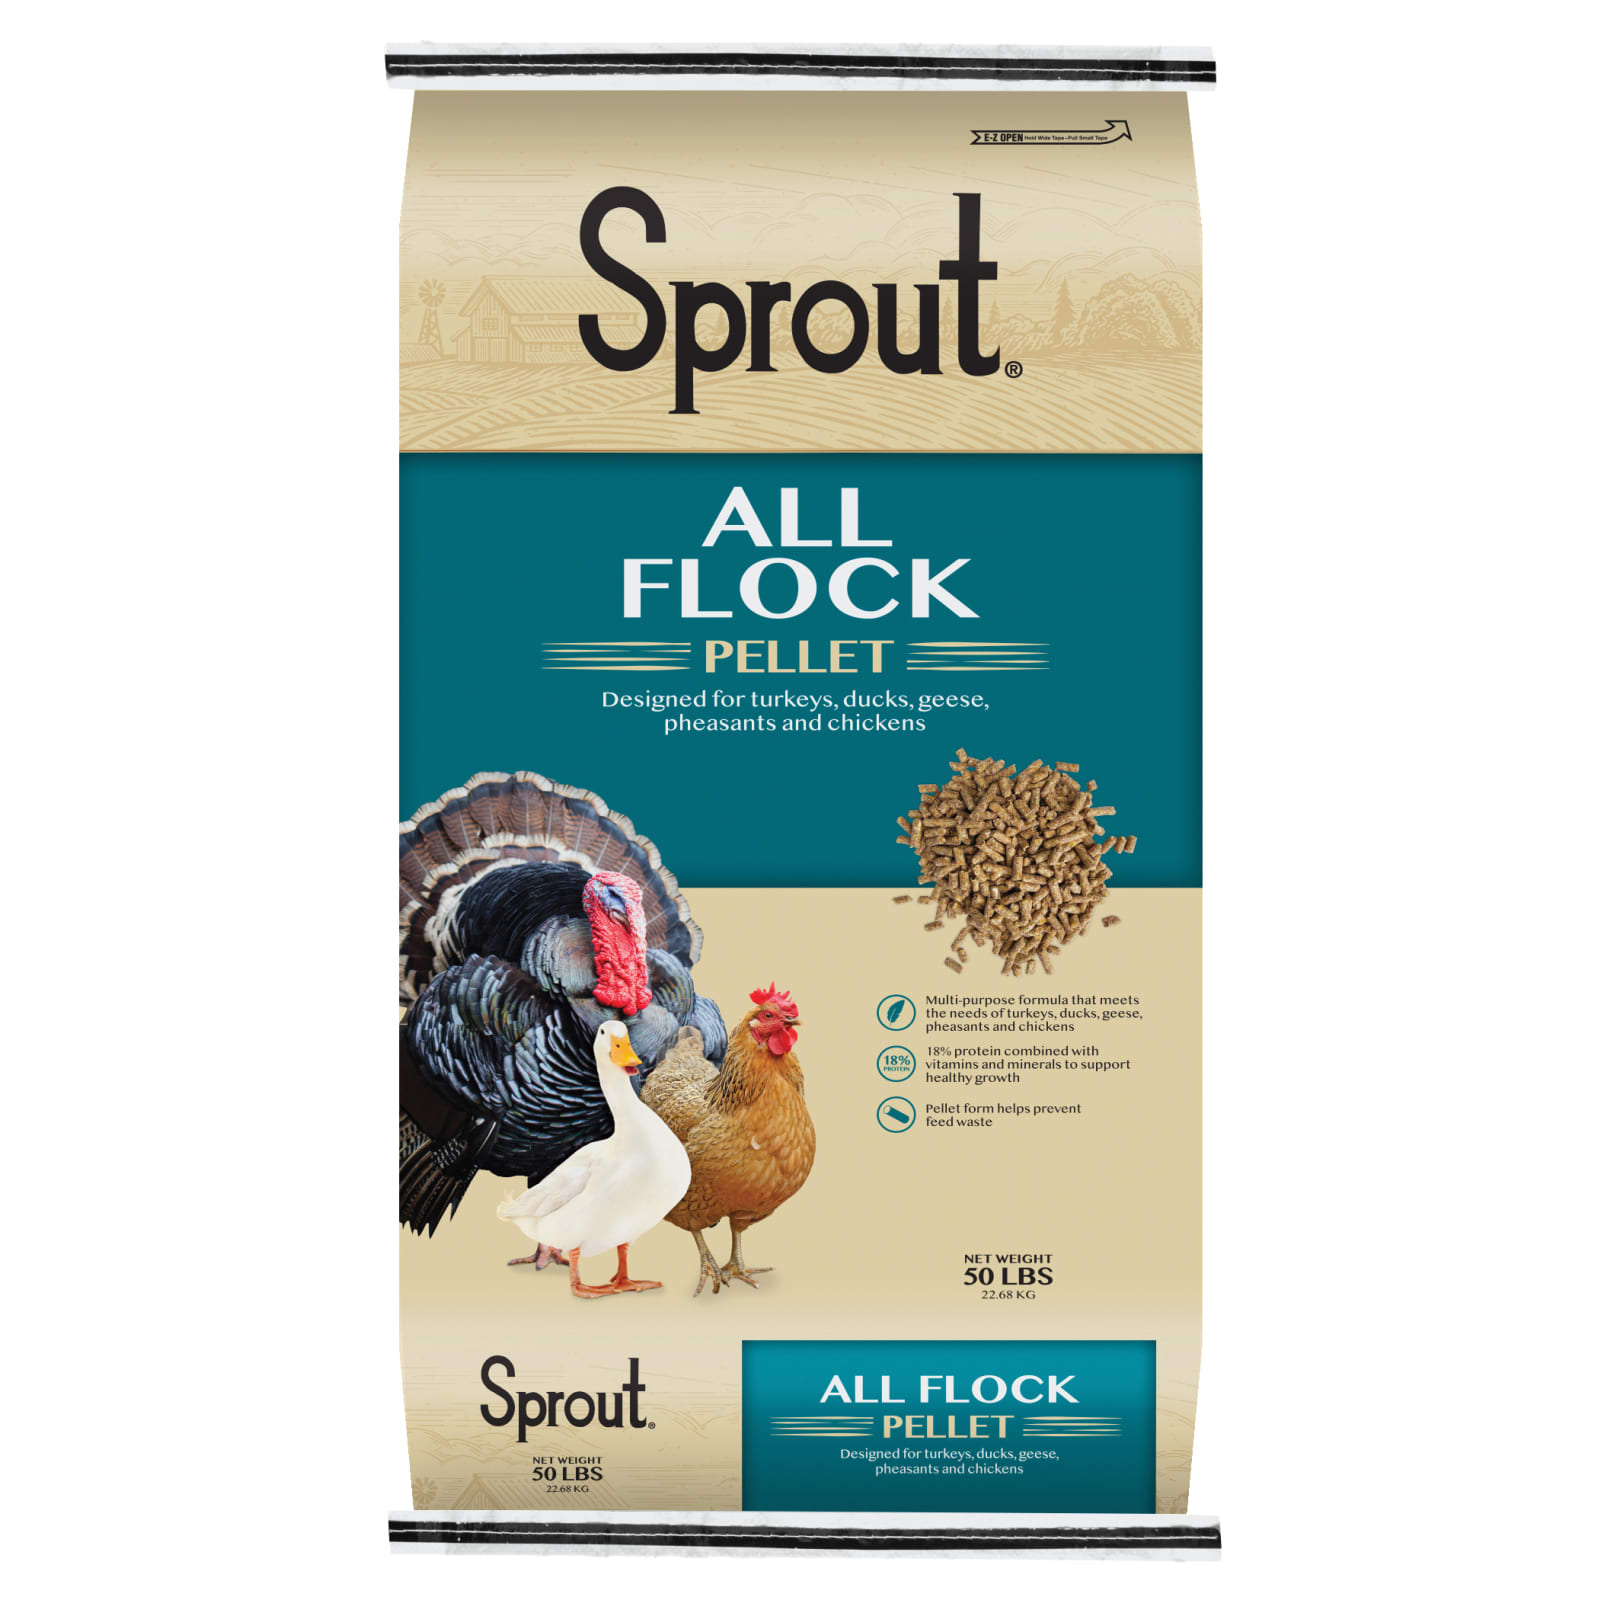 All Flock Poultry Feed - 50 lb by Sprout at Fleet Farm